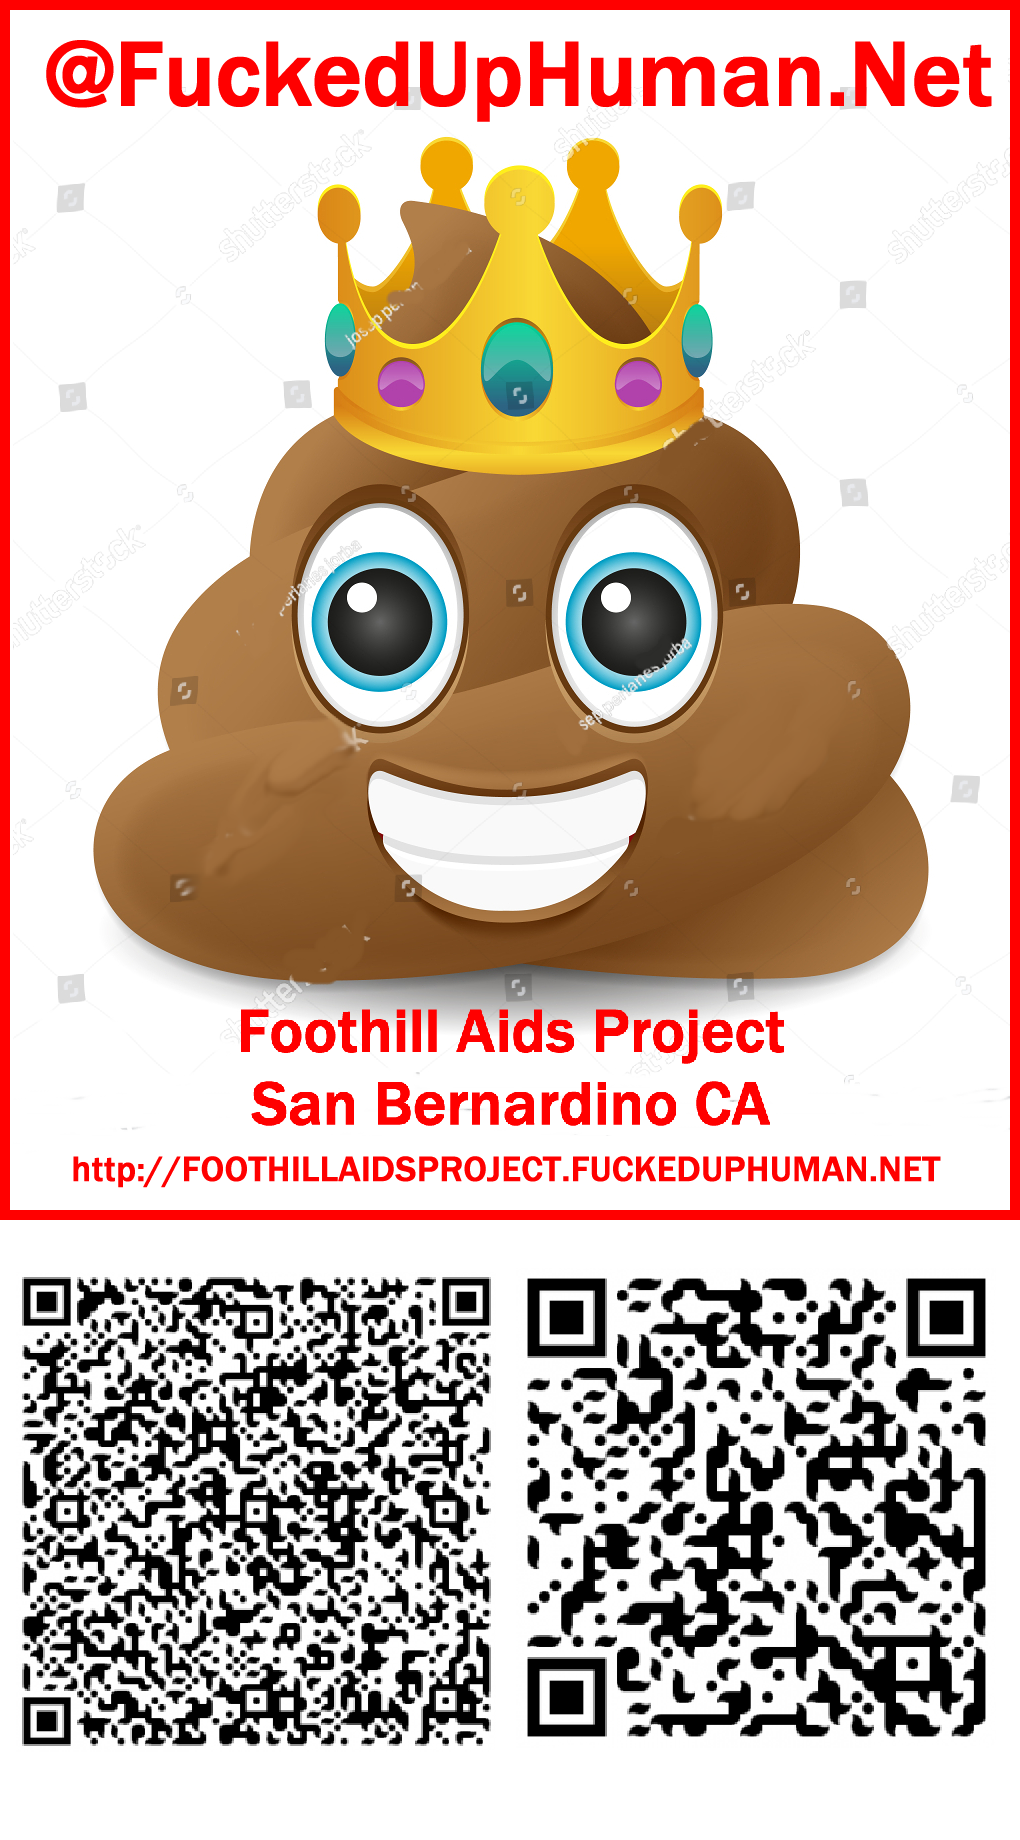 http://michael-r-maynard.foothill-aids-project.foothillaidsproject.fuckeduphuman.net/Shit%20-%20FoothillAidsProject@fuckeduphuman.net.png